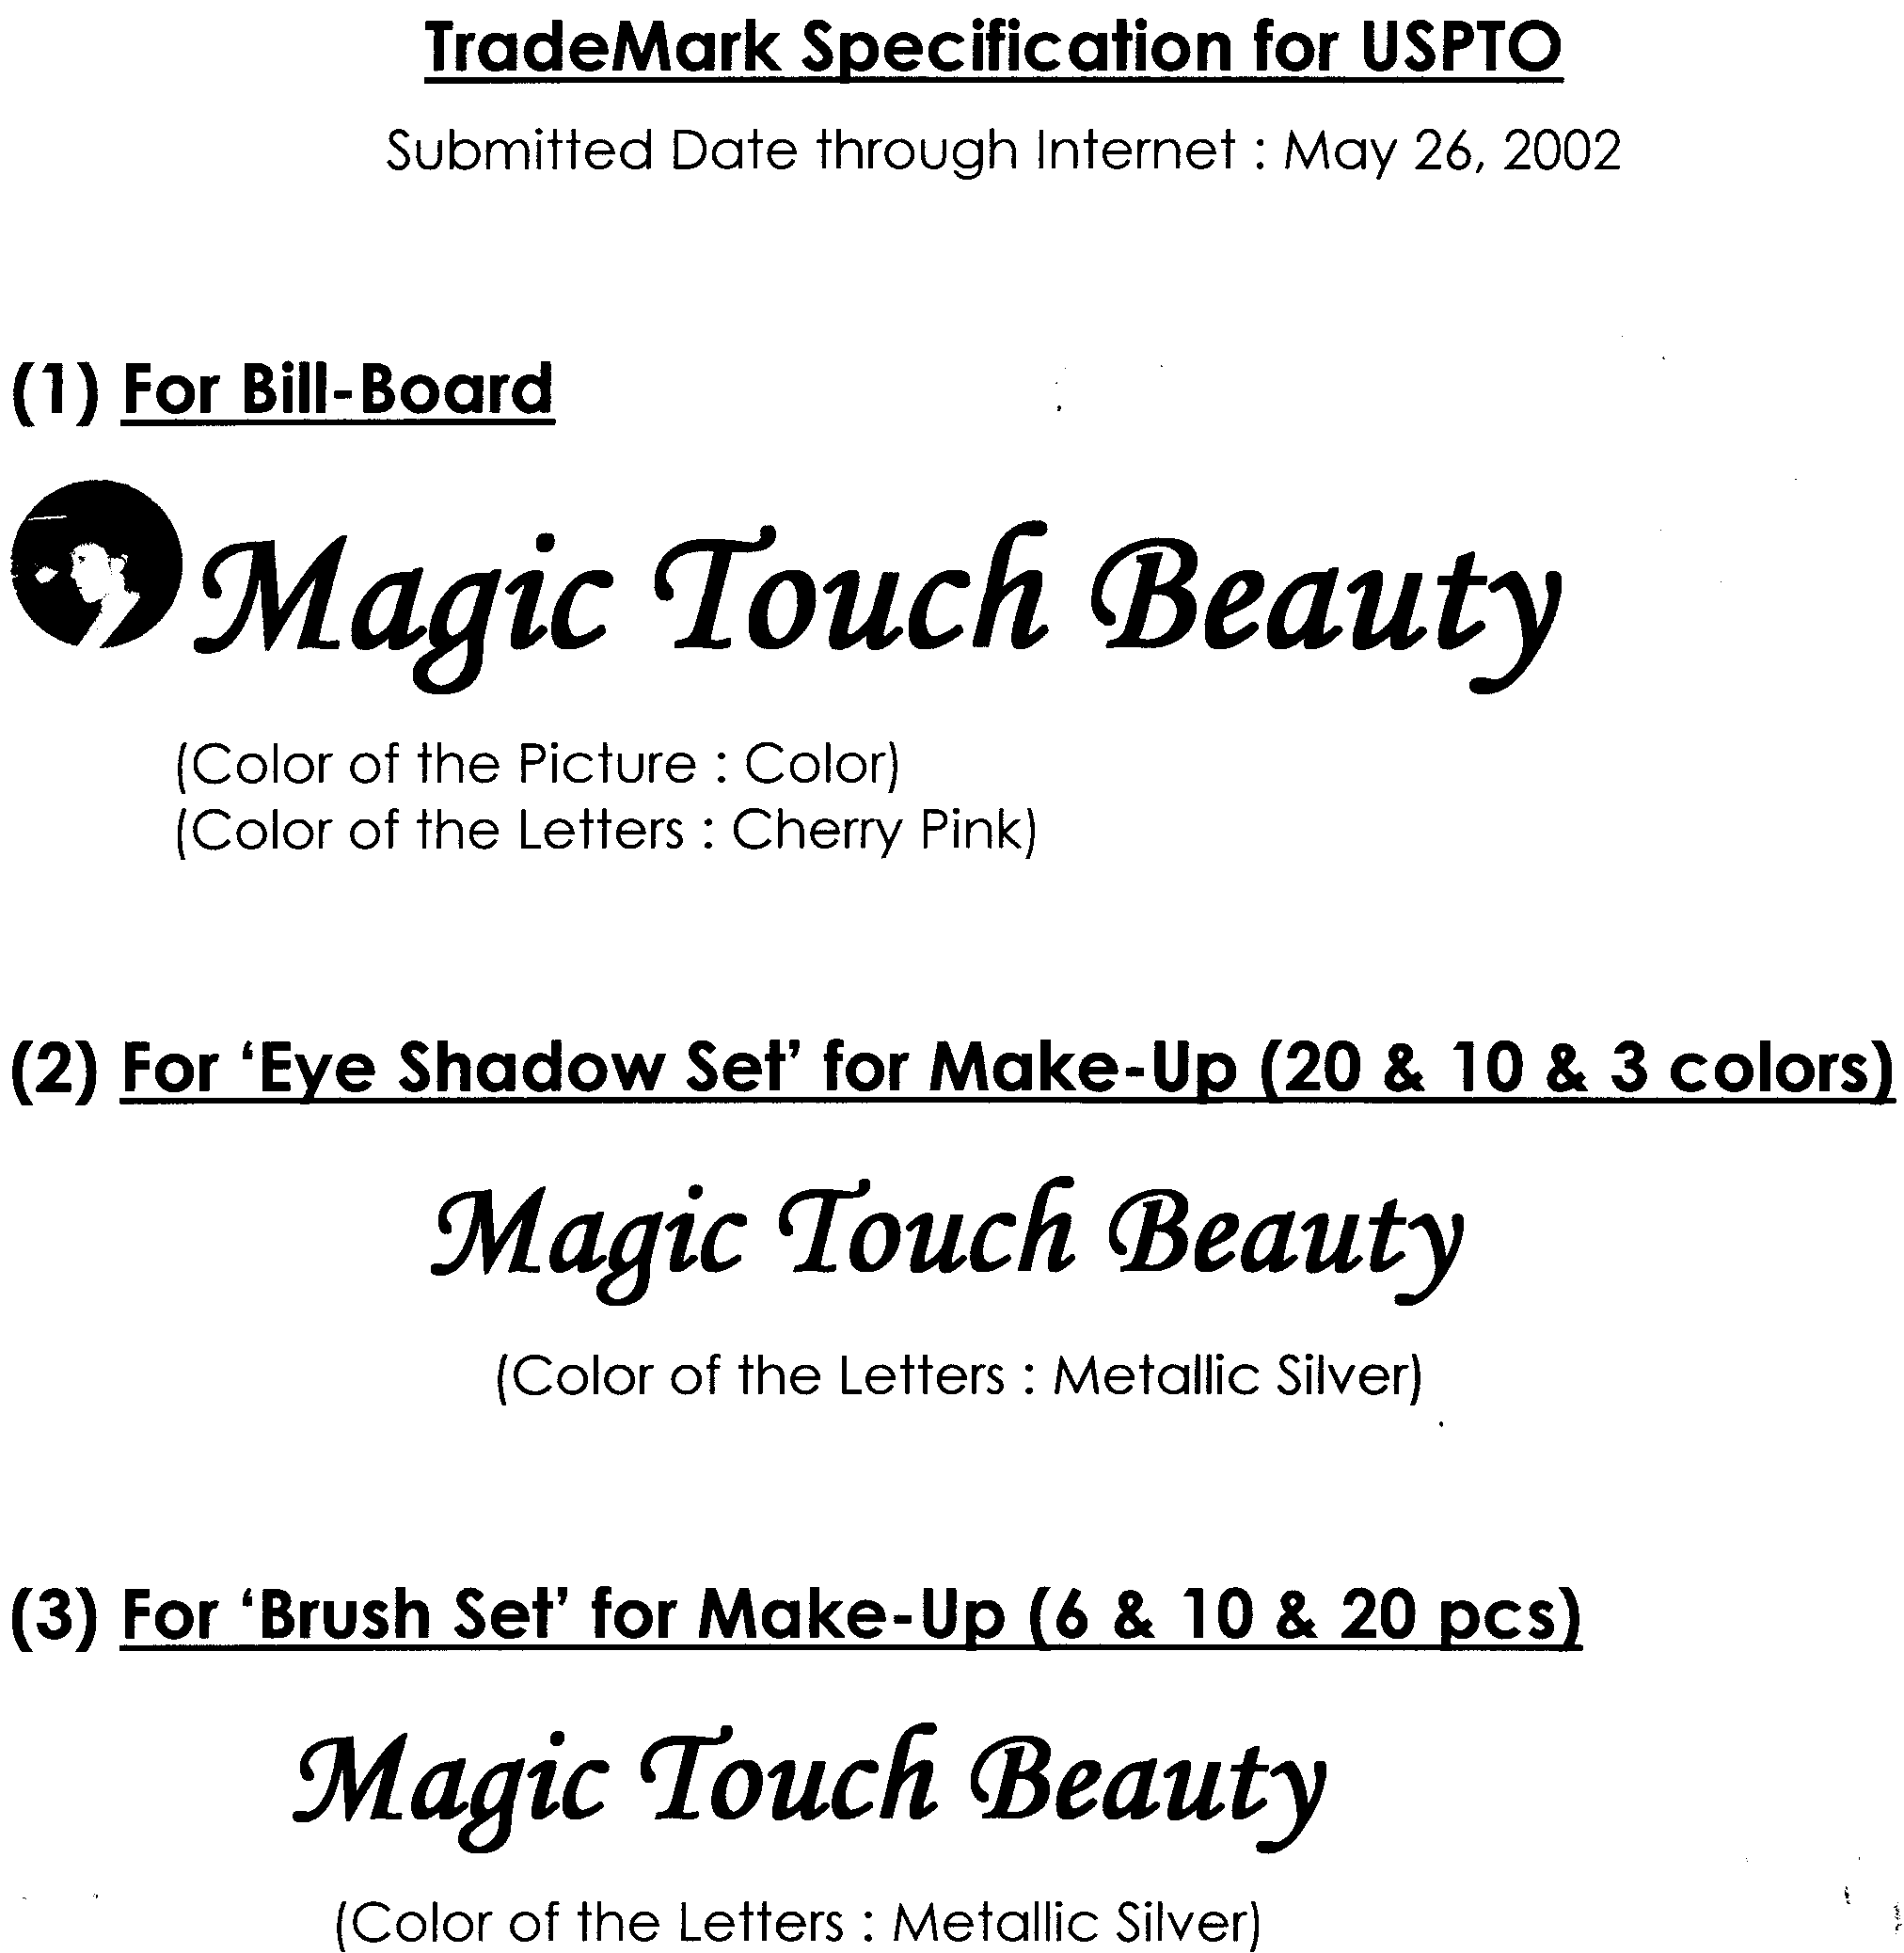  MAGIC TOUCH BEAUTY